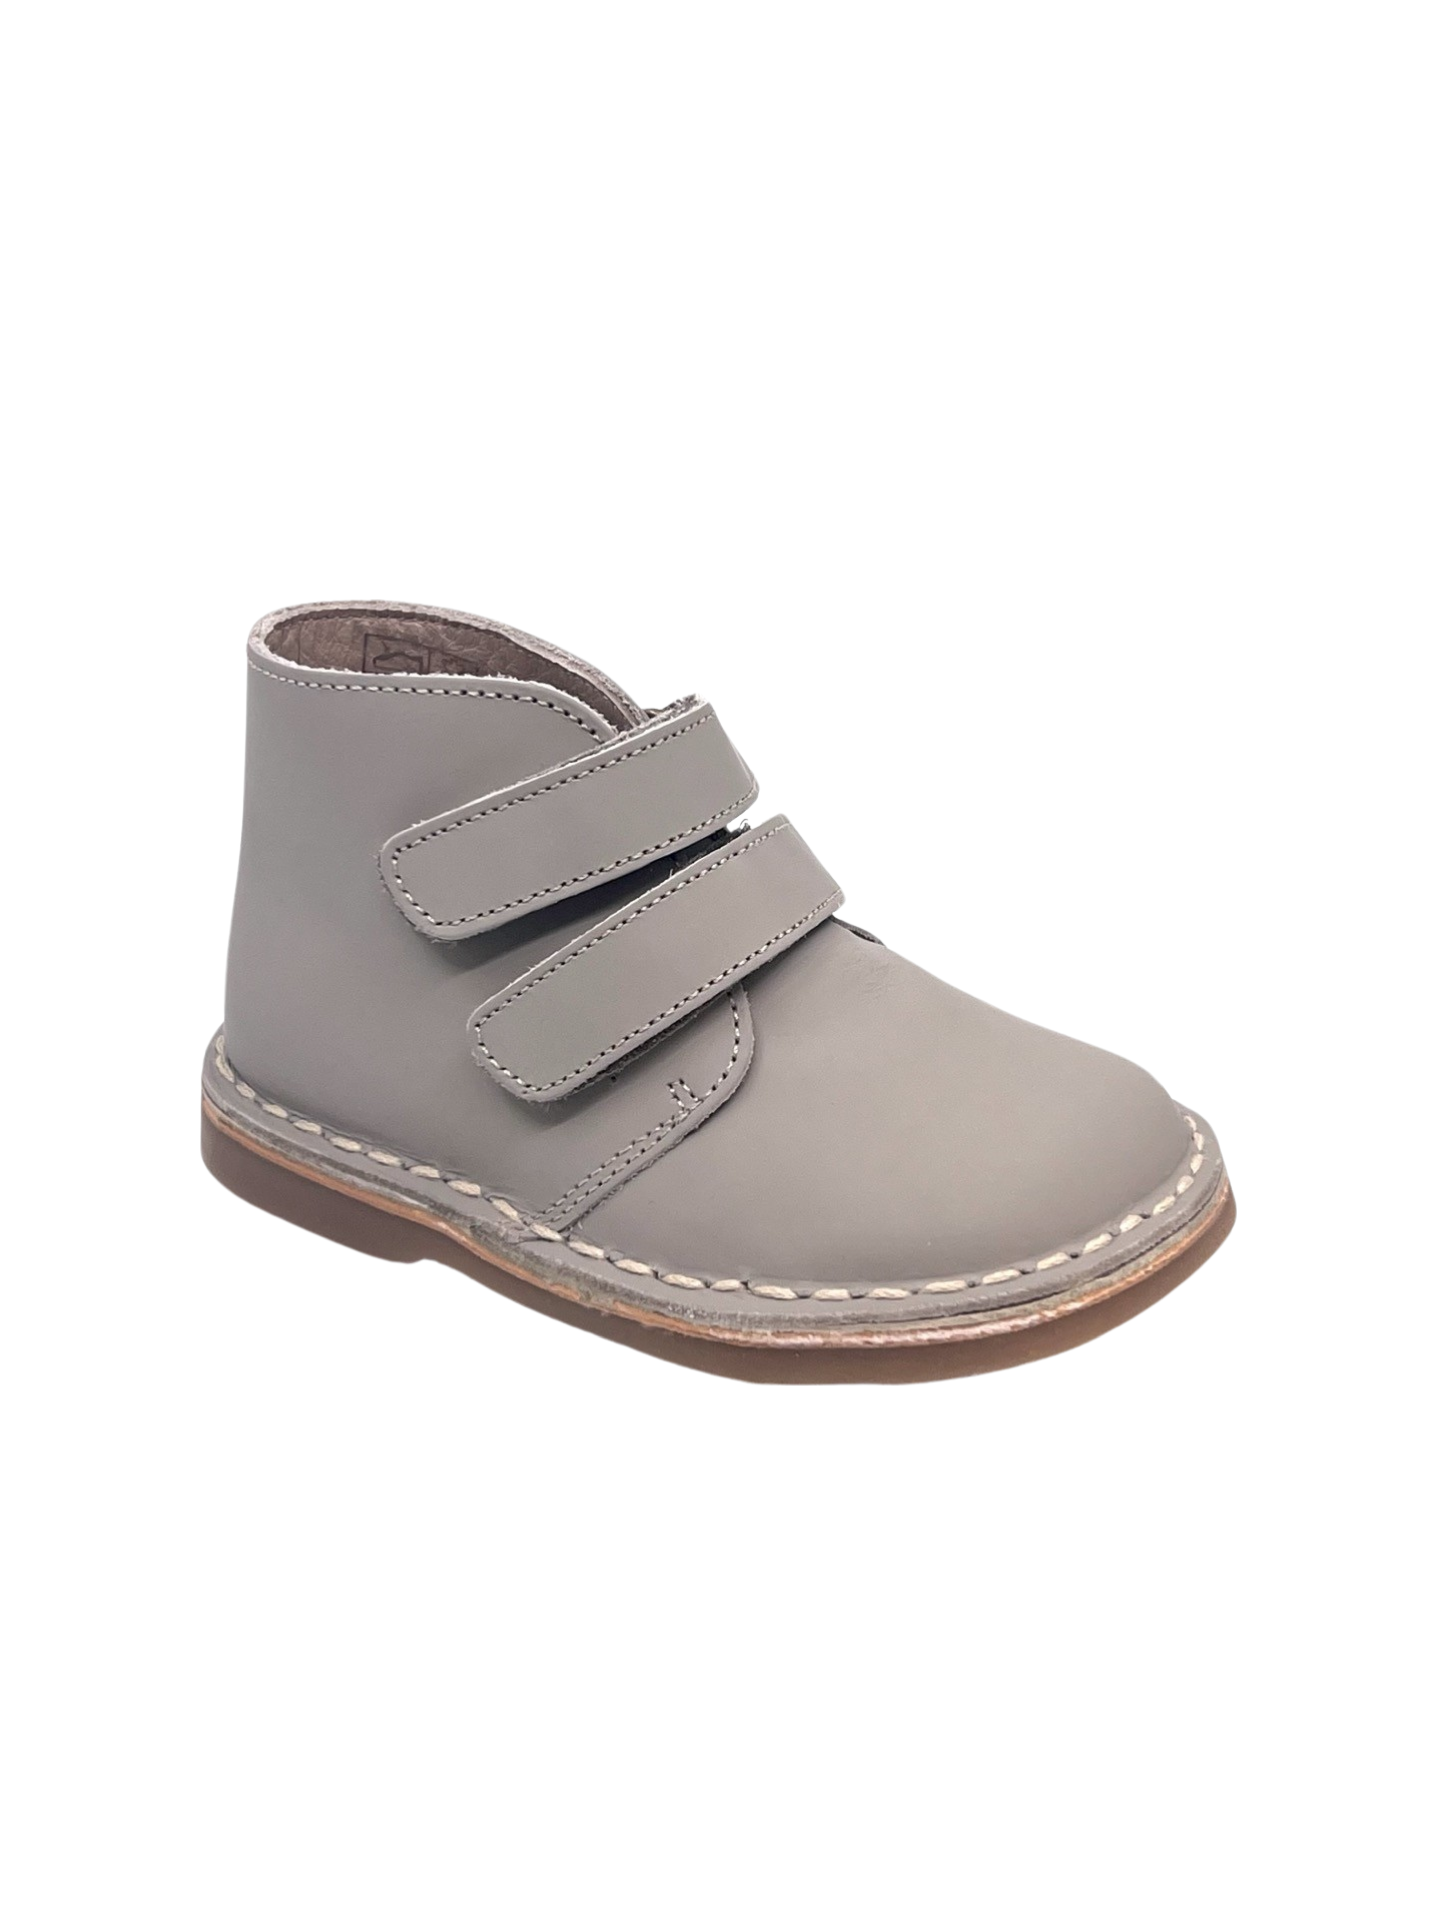 Blublonc Taupe Double Velcro Baby Bootie